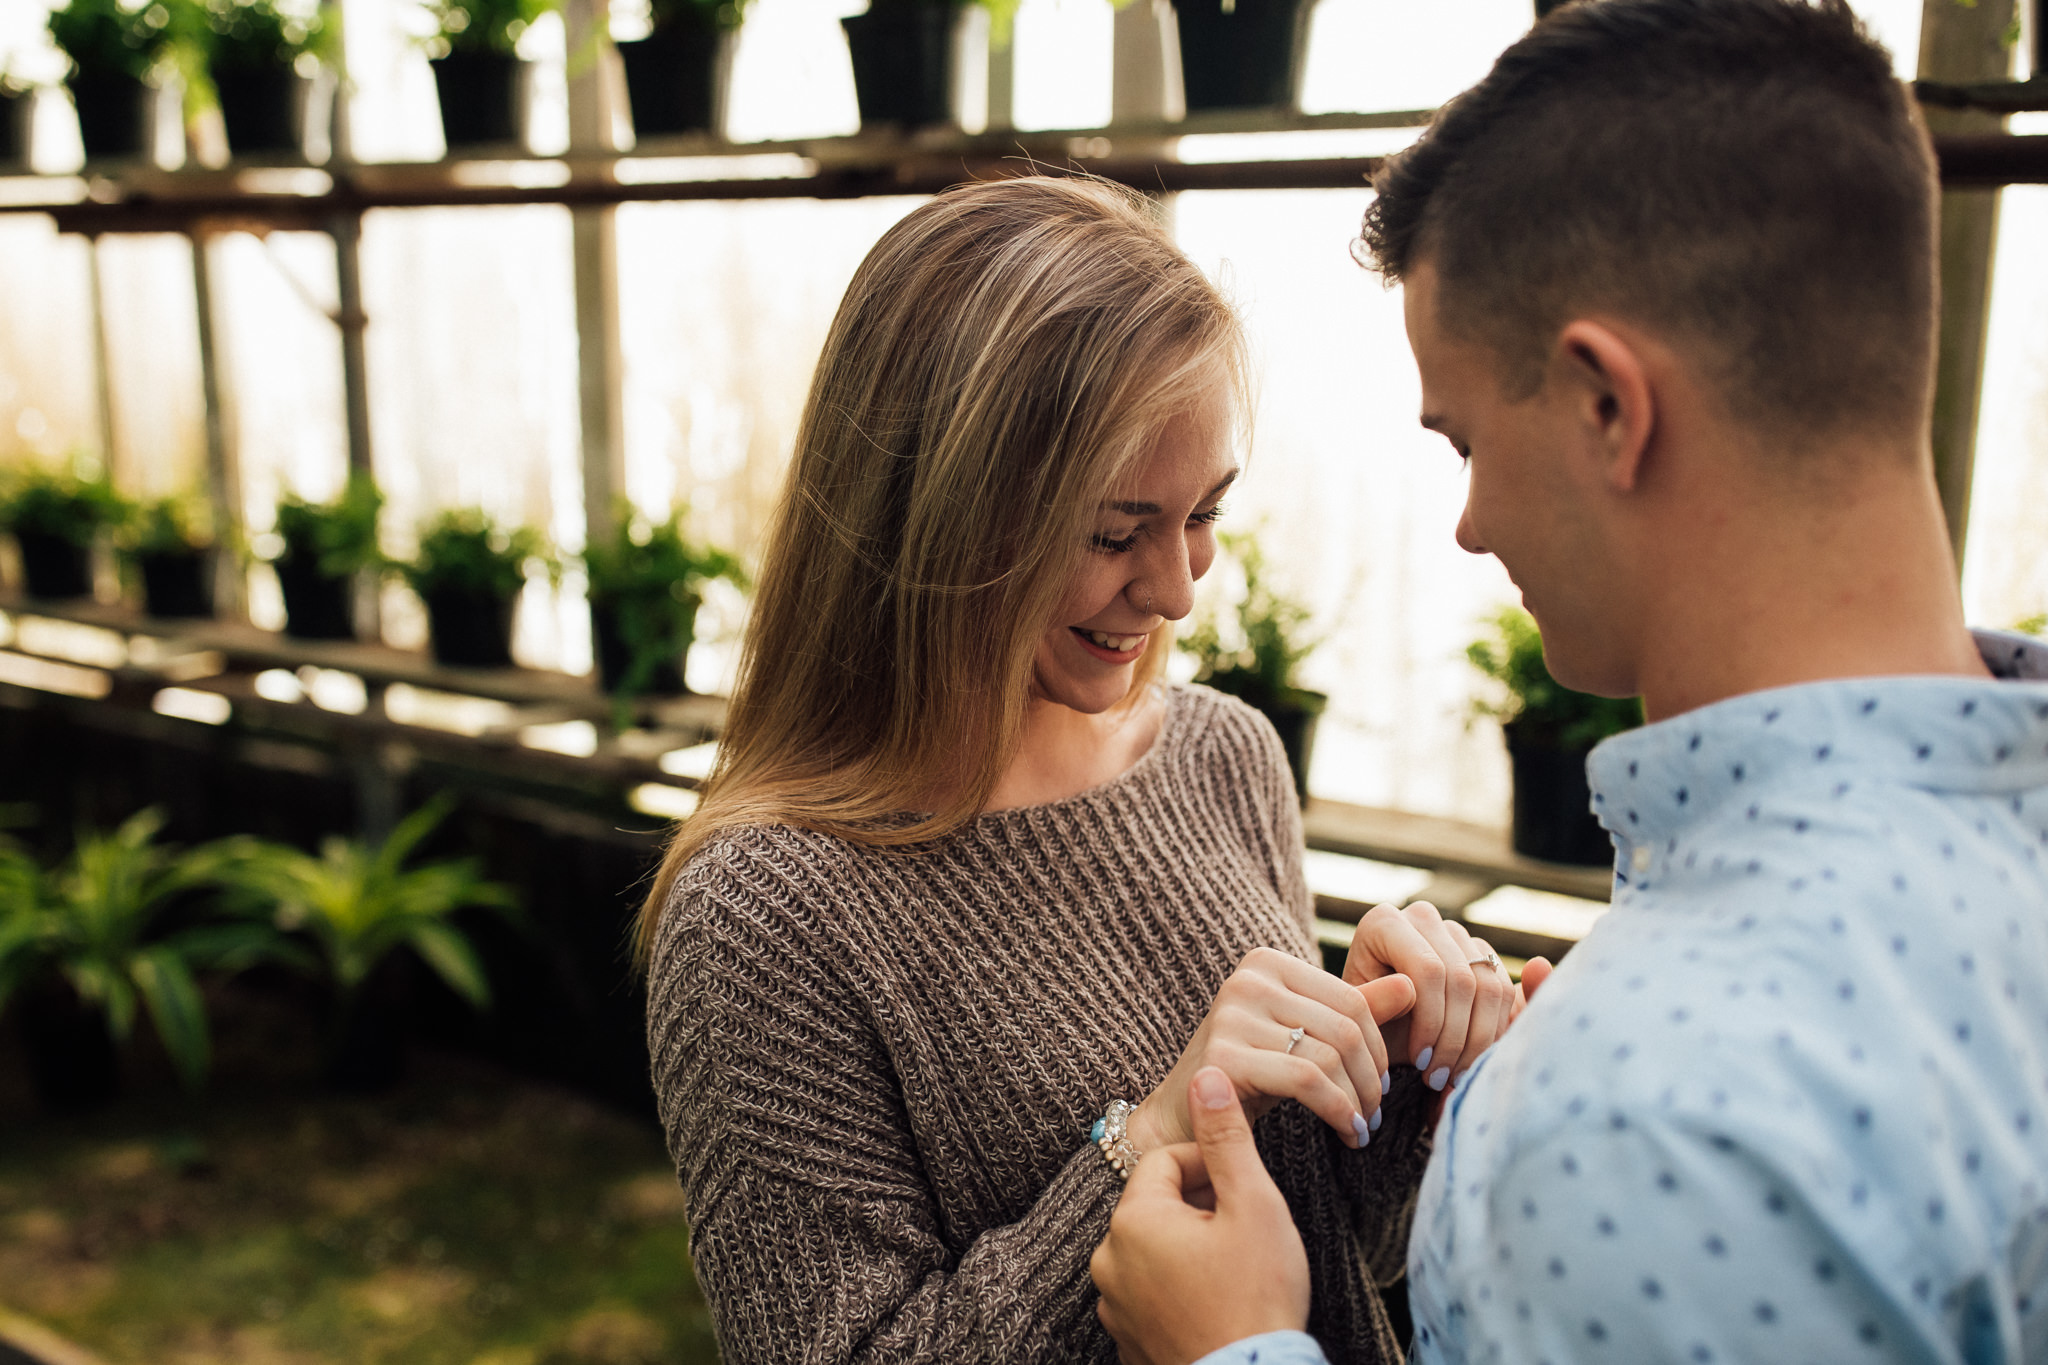 memphis-engagement-photographer-thewarmtharoundyou-greenhouse-engagement-pictures (28 of 118).jpg